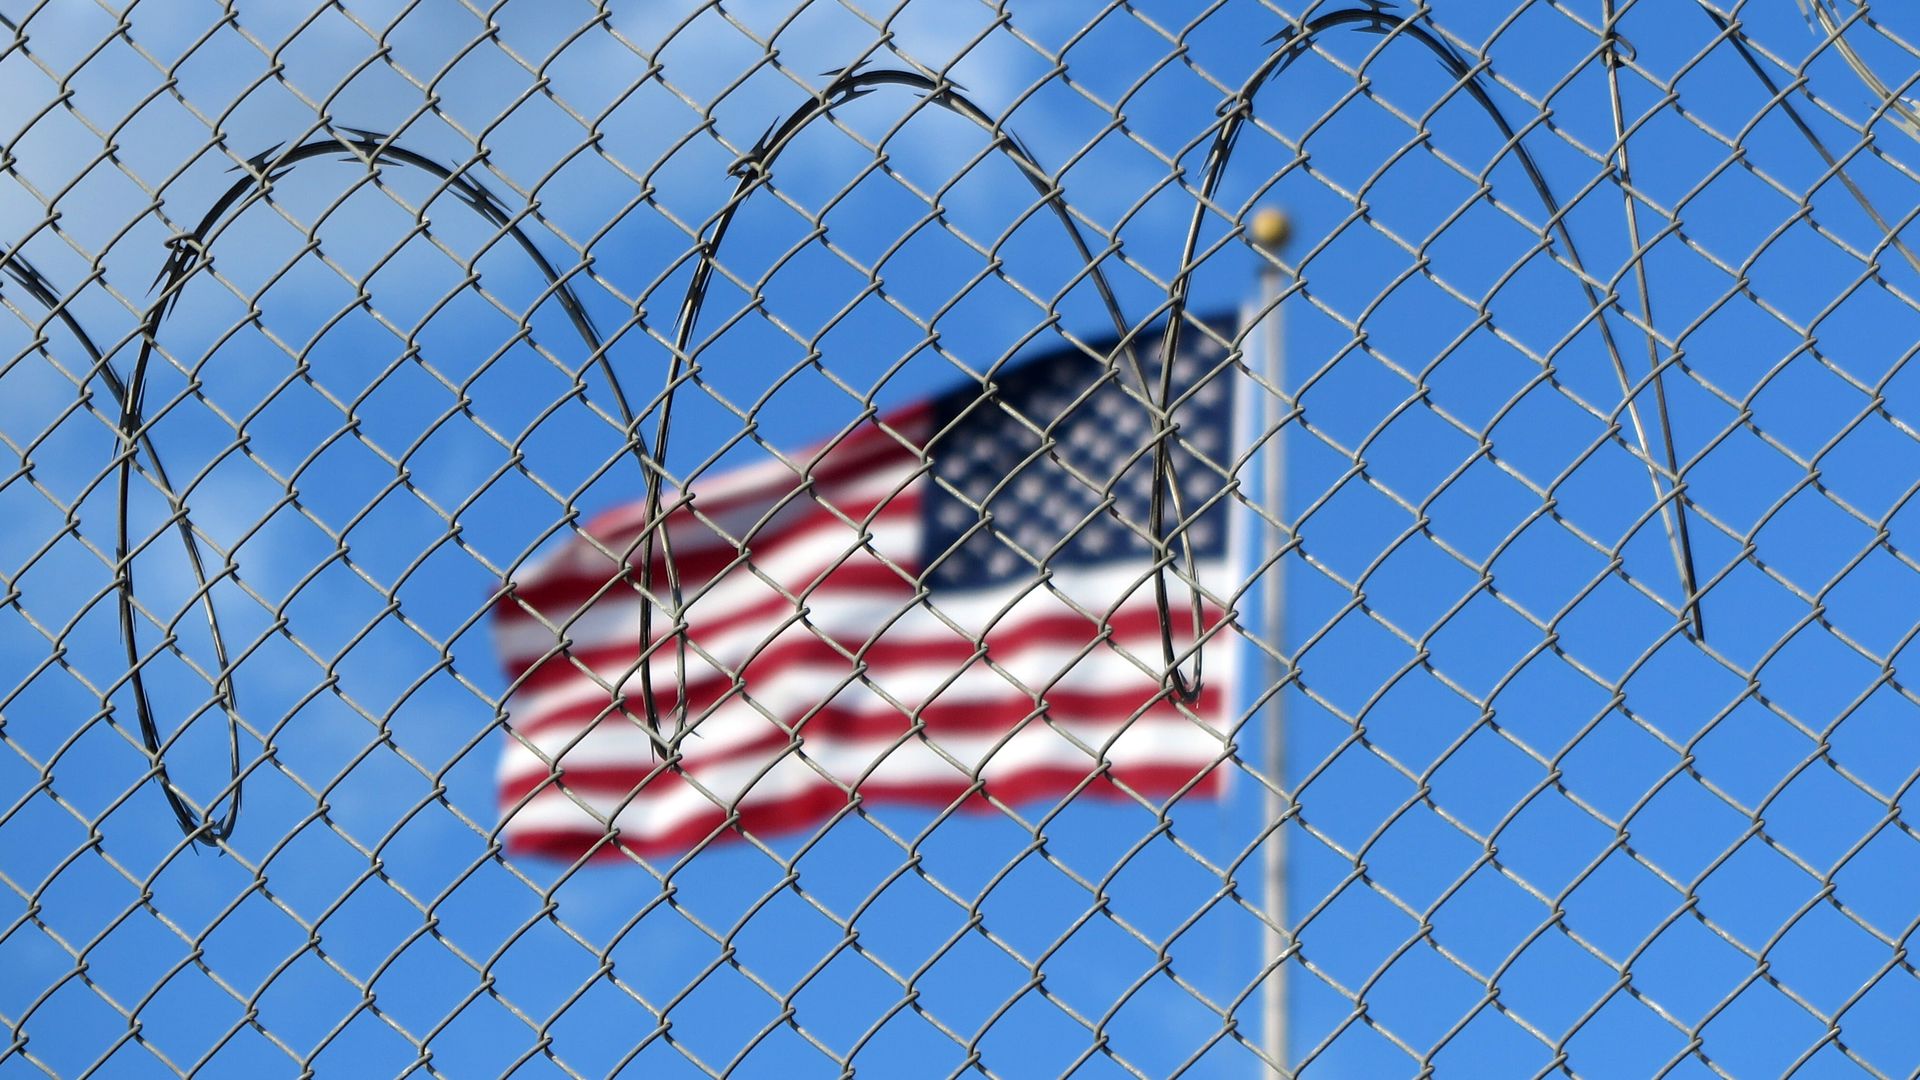  A U.S. flag flies behind barbed wire at the Guantánamo Bay naval base in Cuba. 